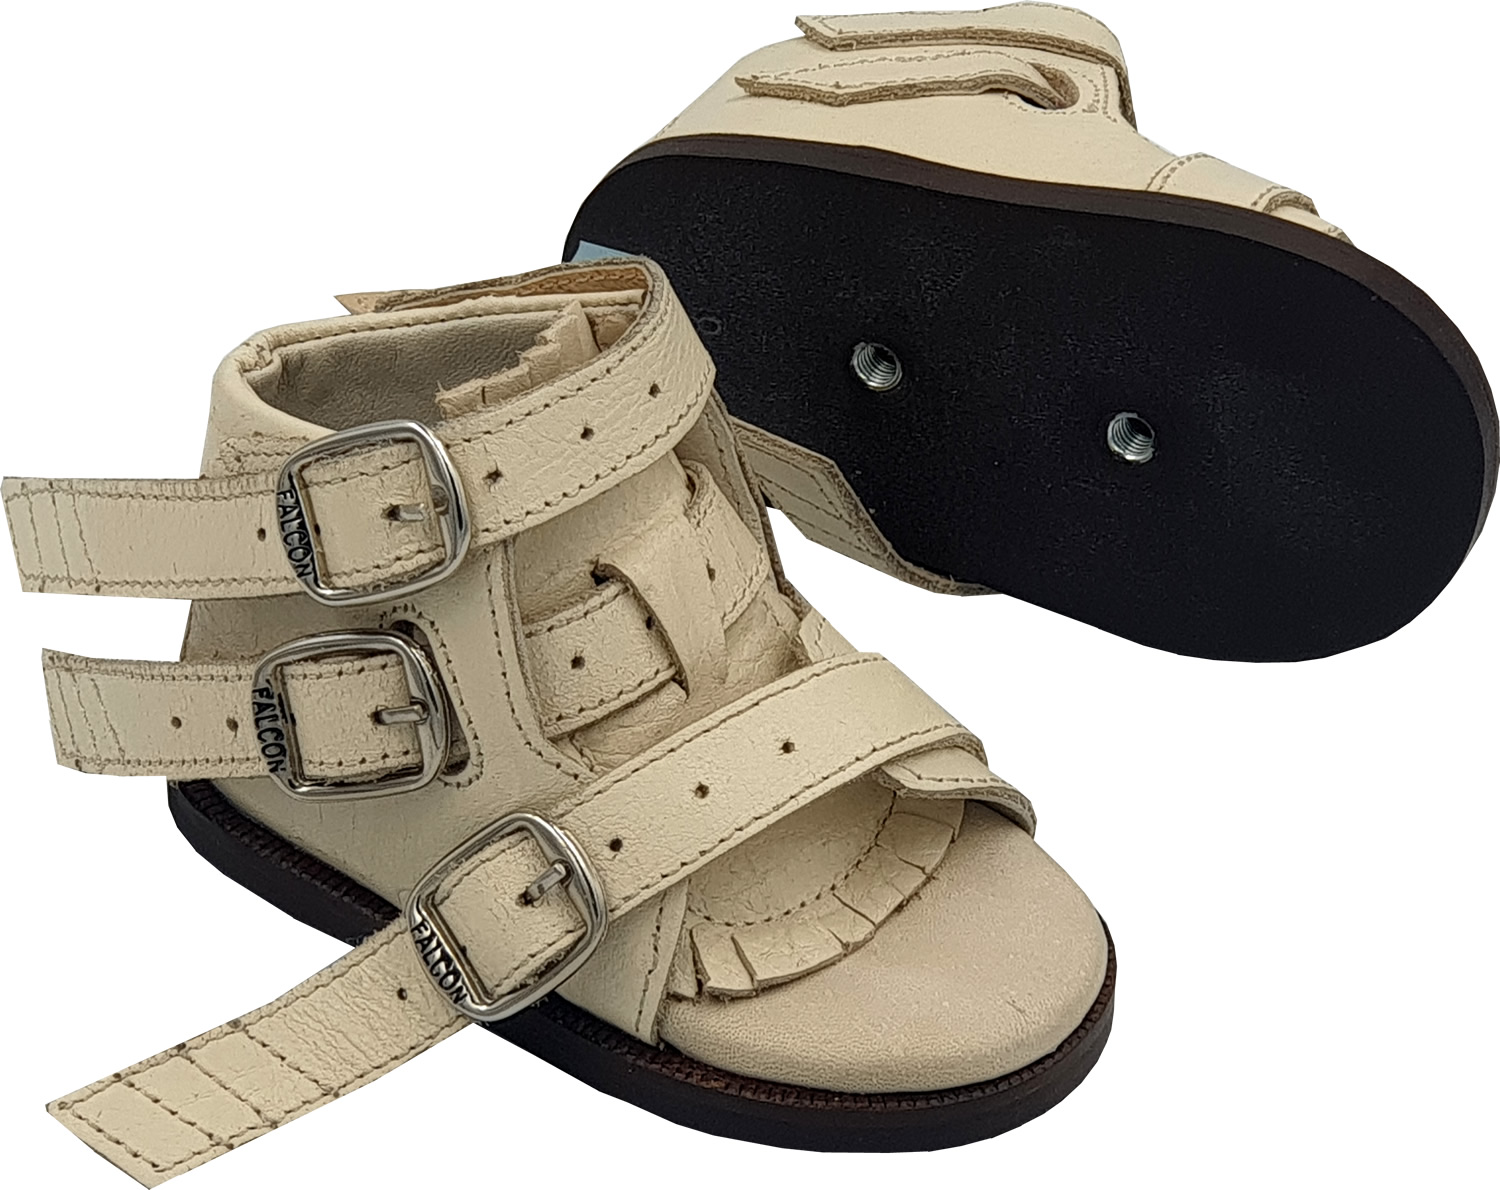 Dennis brown shoes, club foot shoes, ponseti shoes and foot abduction  orthosis shoes